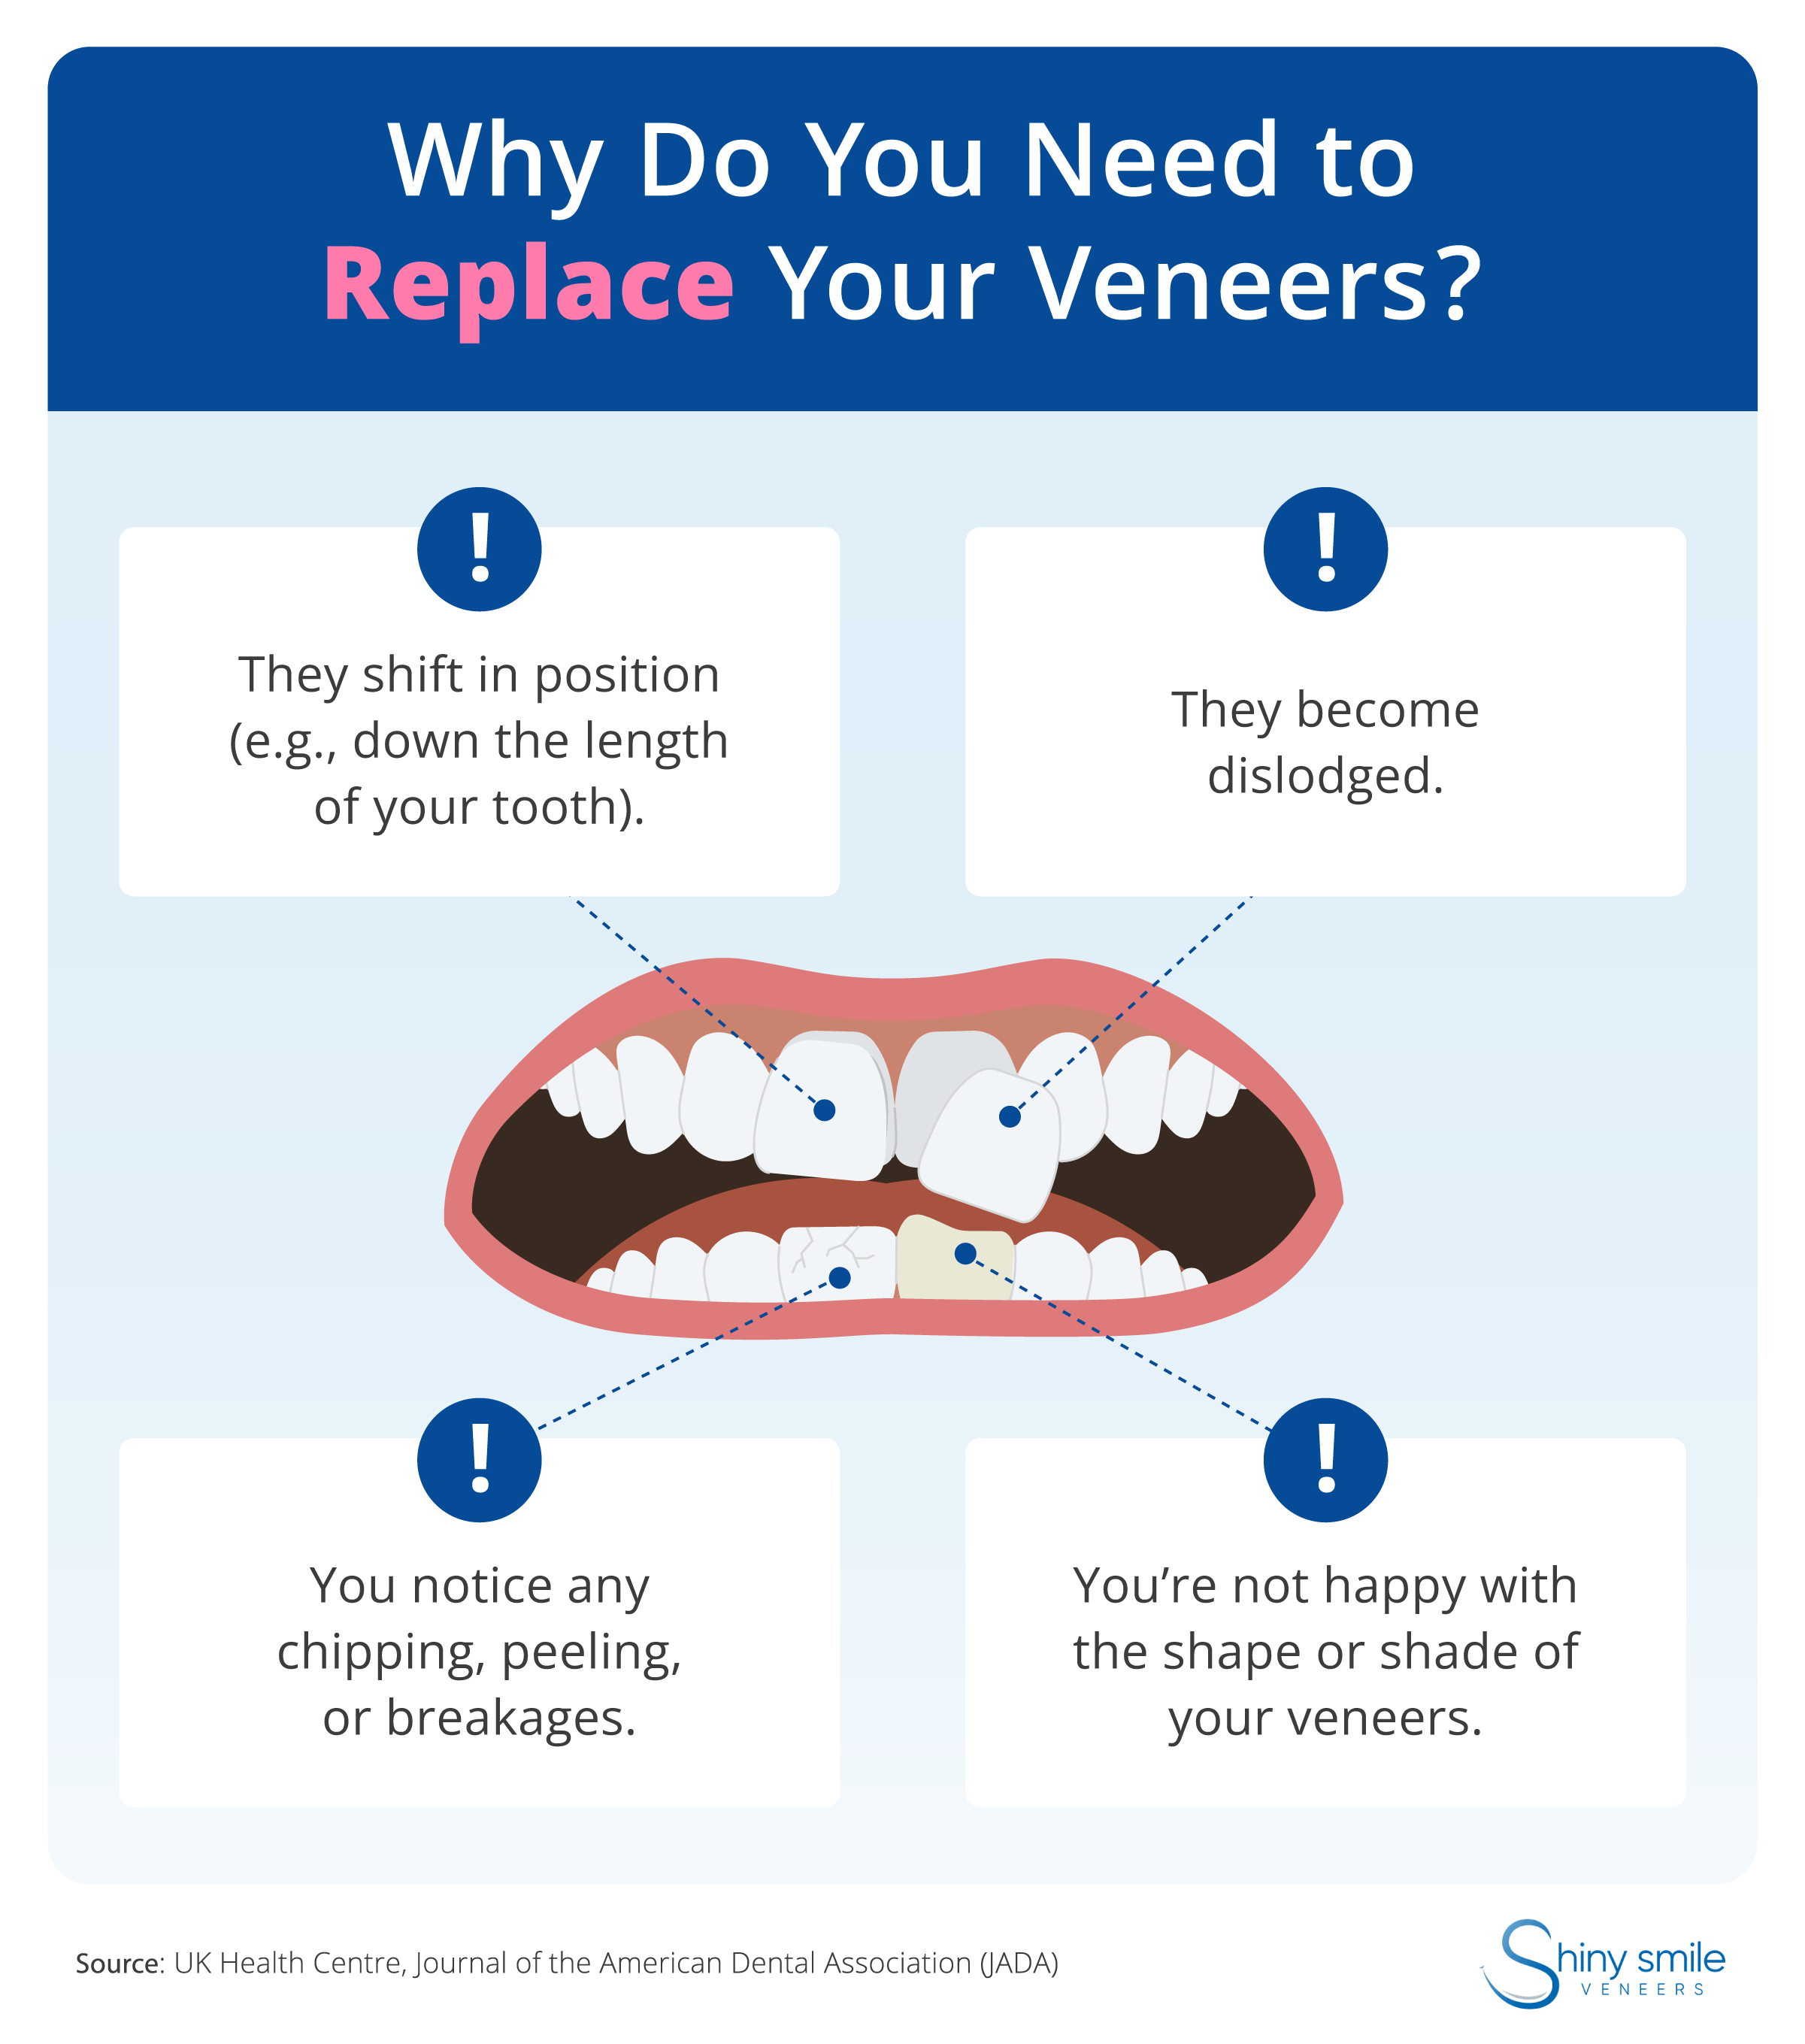 An illustration of why veneers may need to be replaced